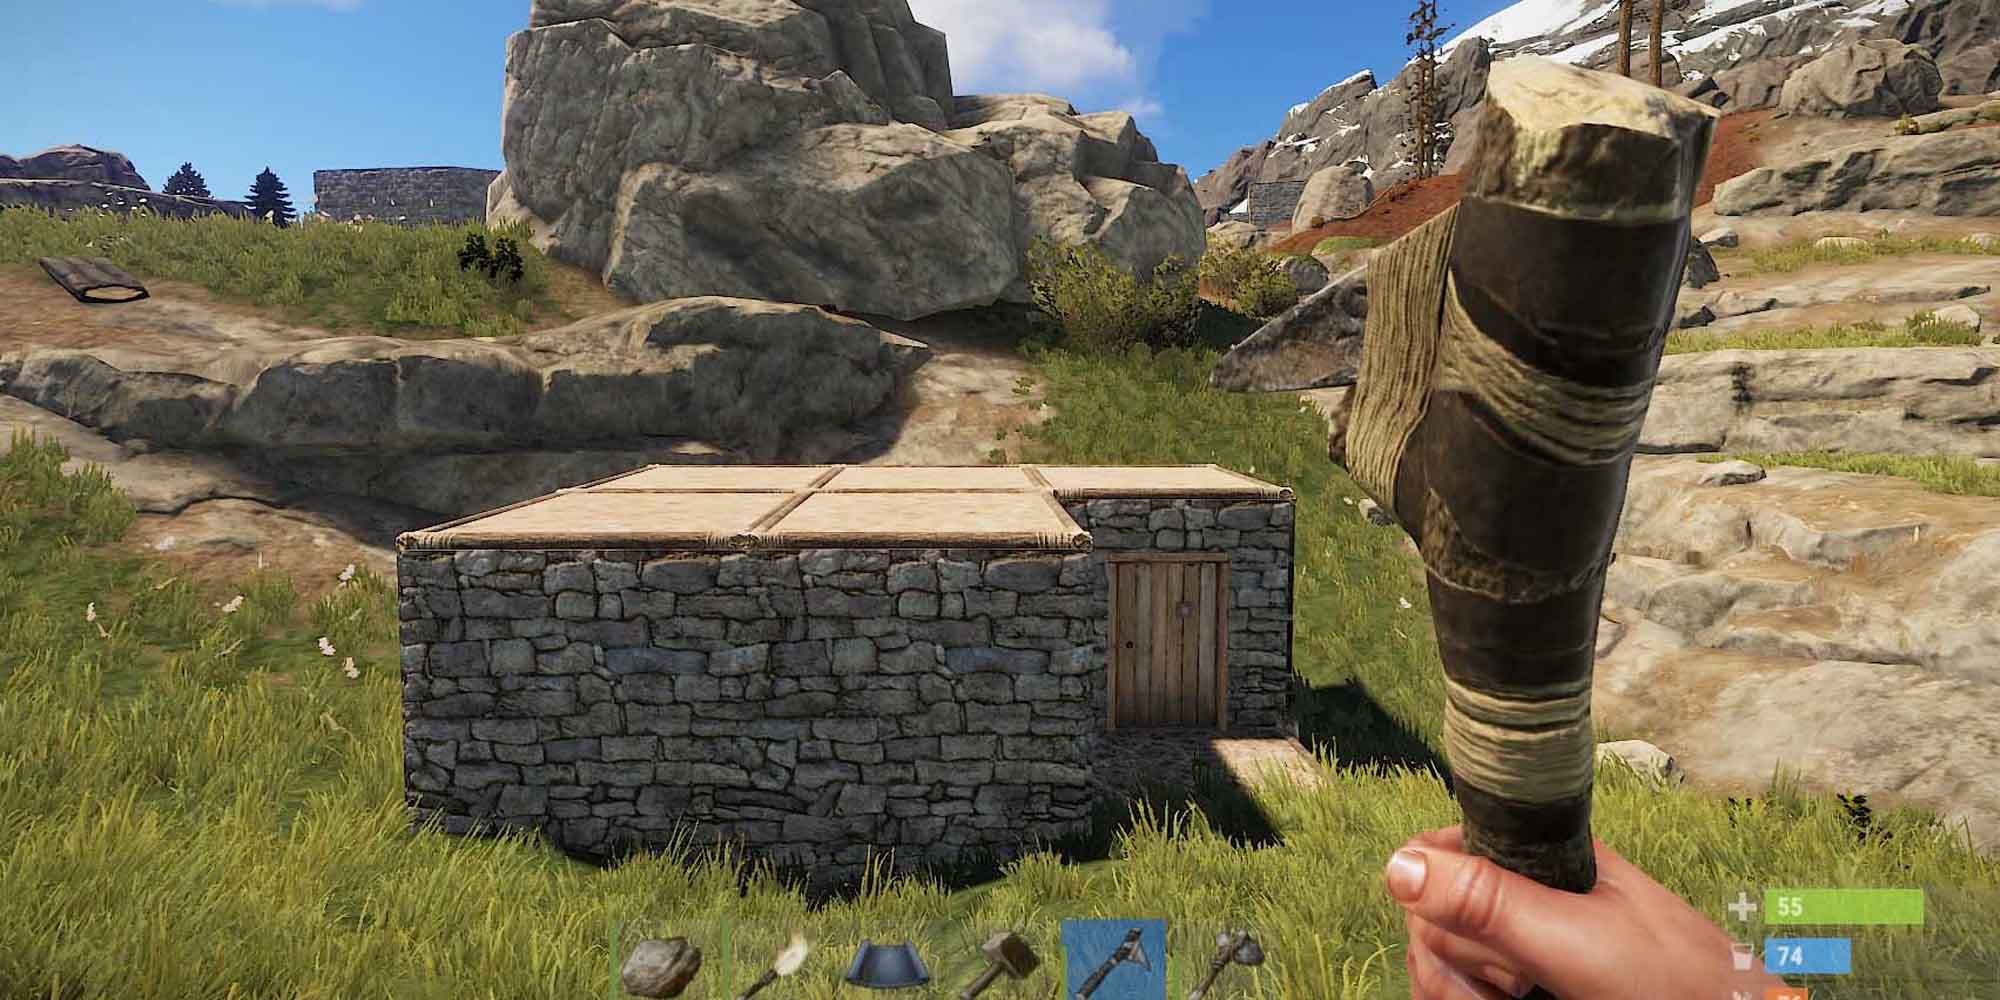 Using a crude weapon while exploring the land in Rust